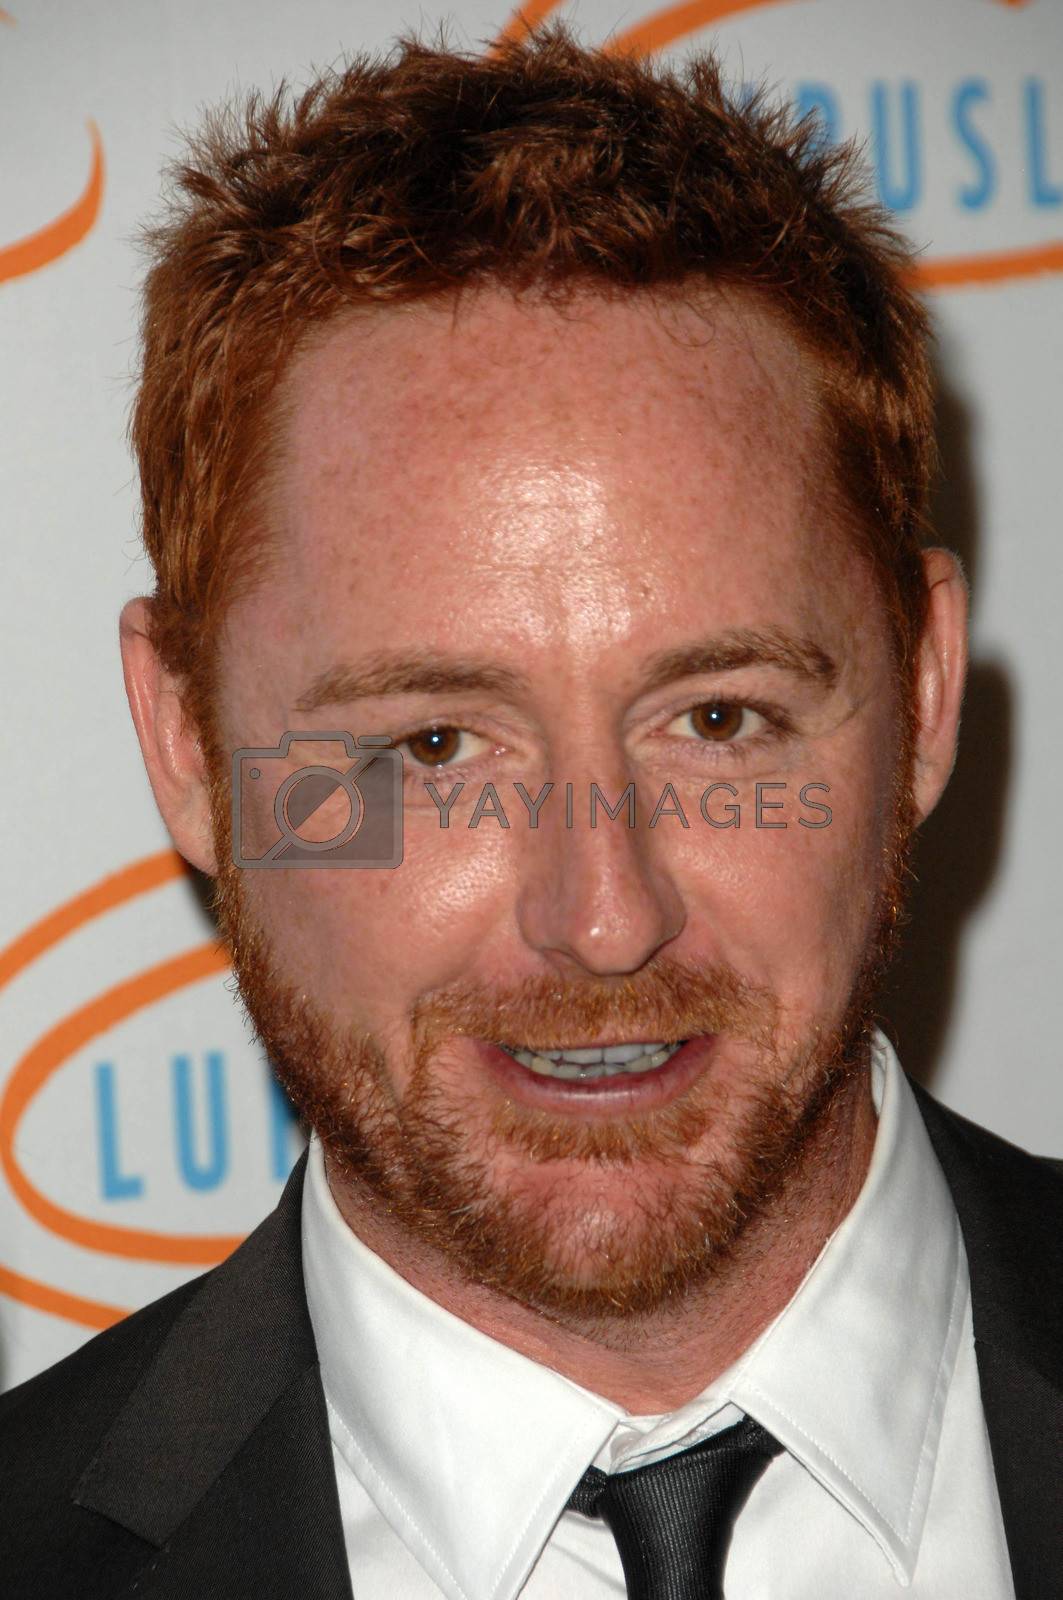 Royalty free image of Scott Grimes
/ImageCollect by ImageCollect